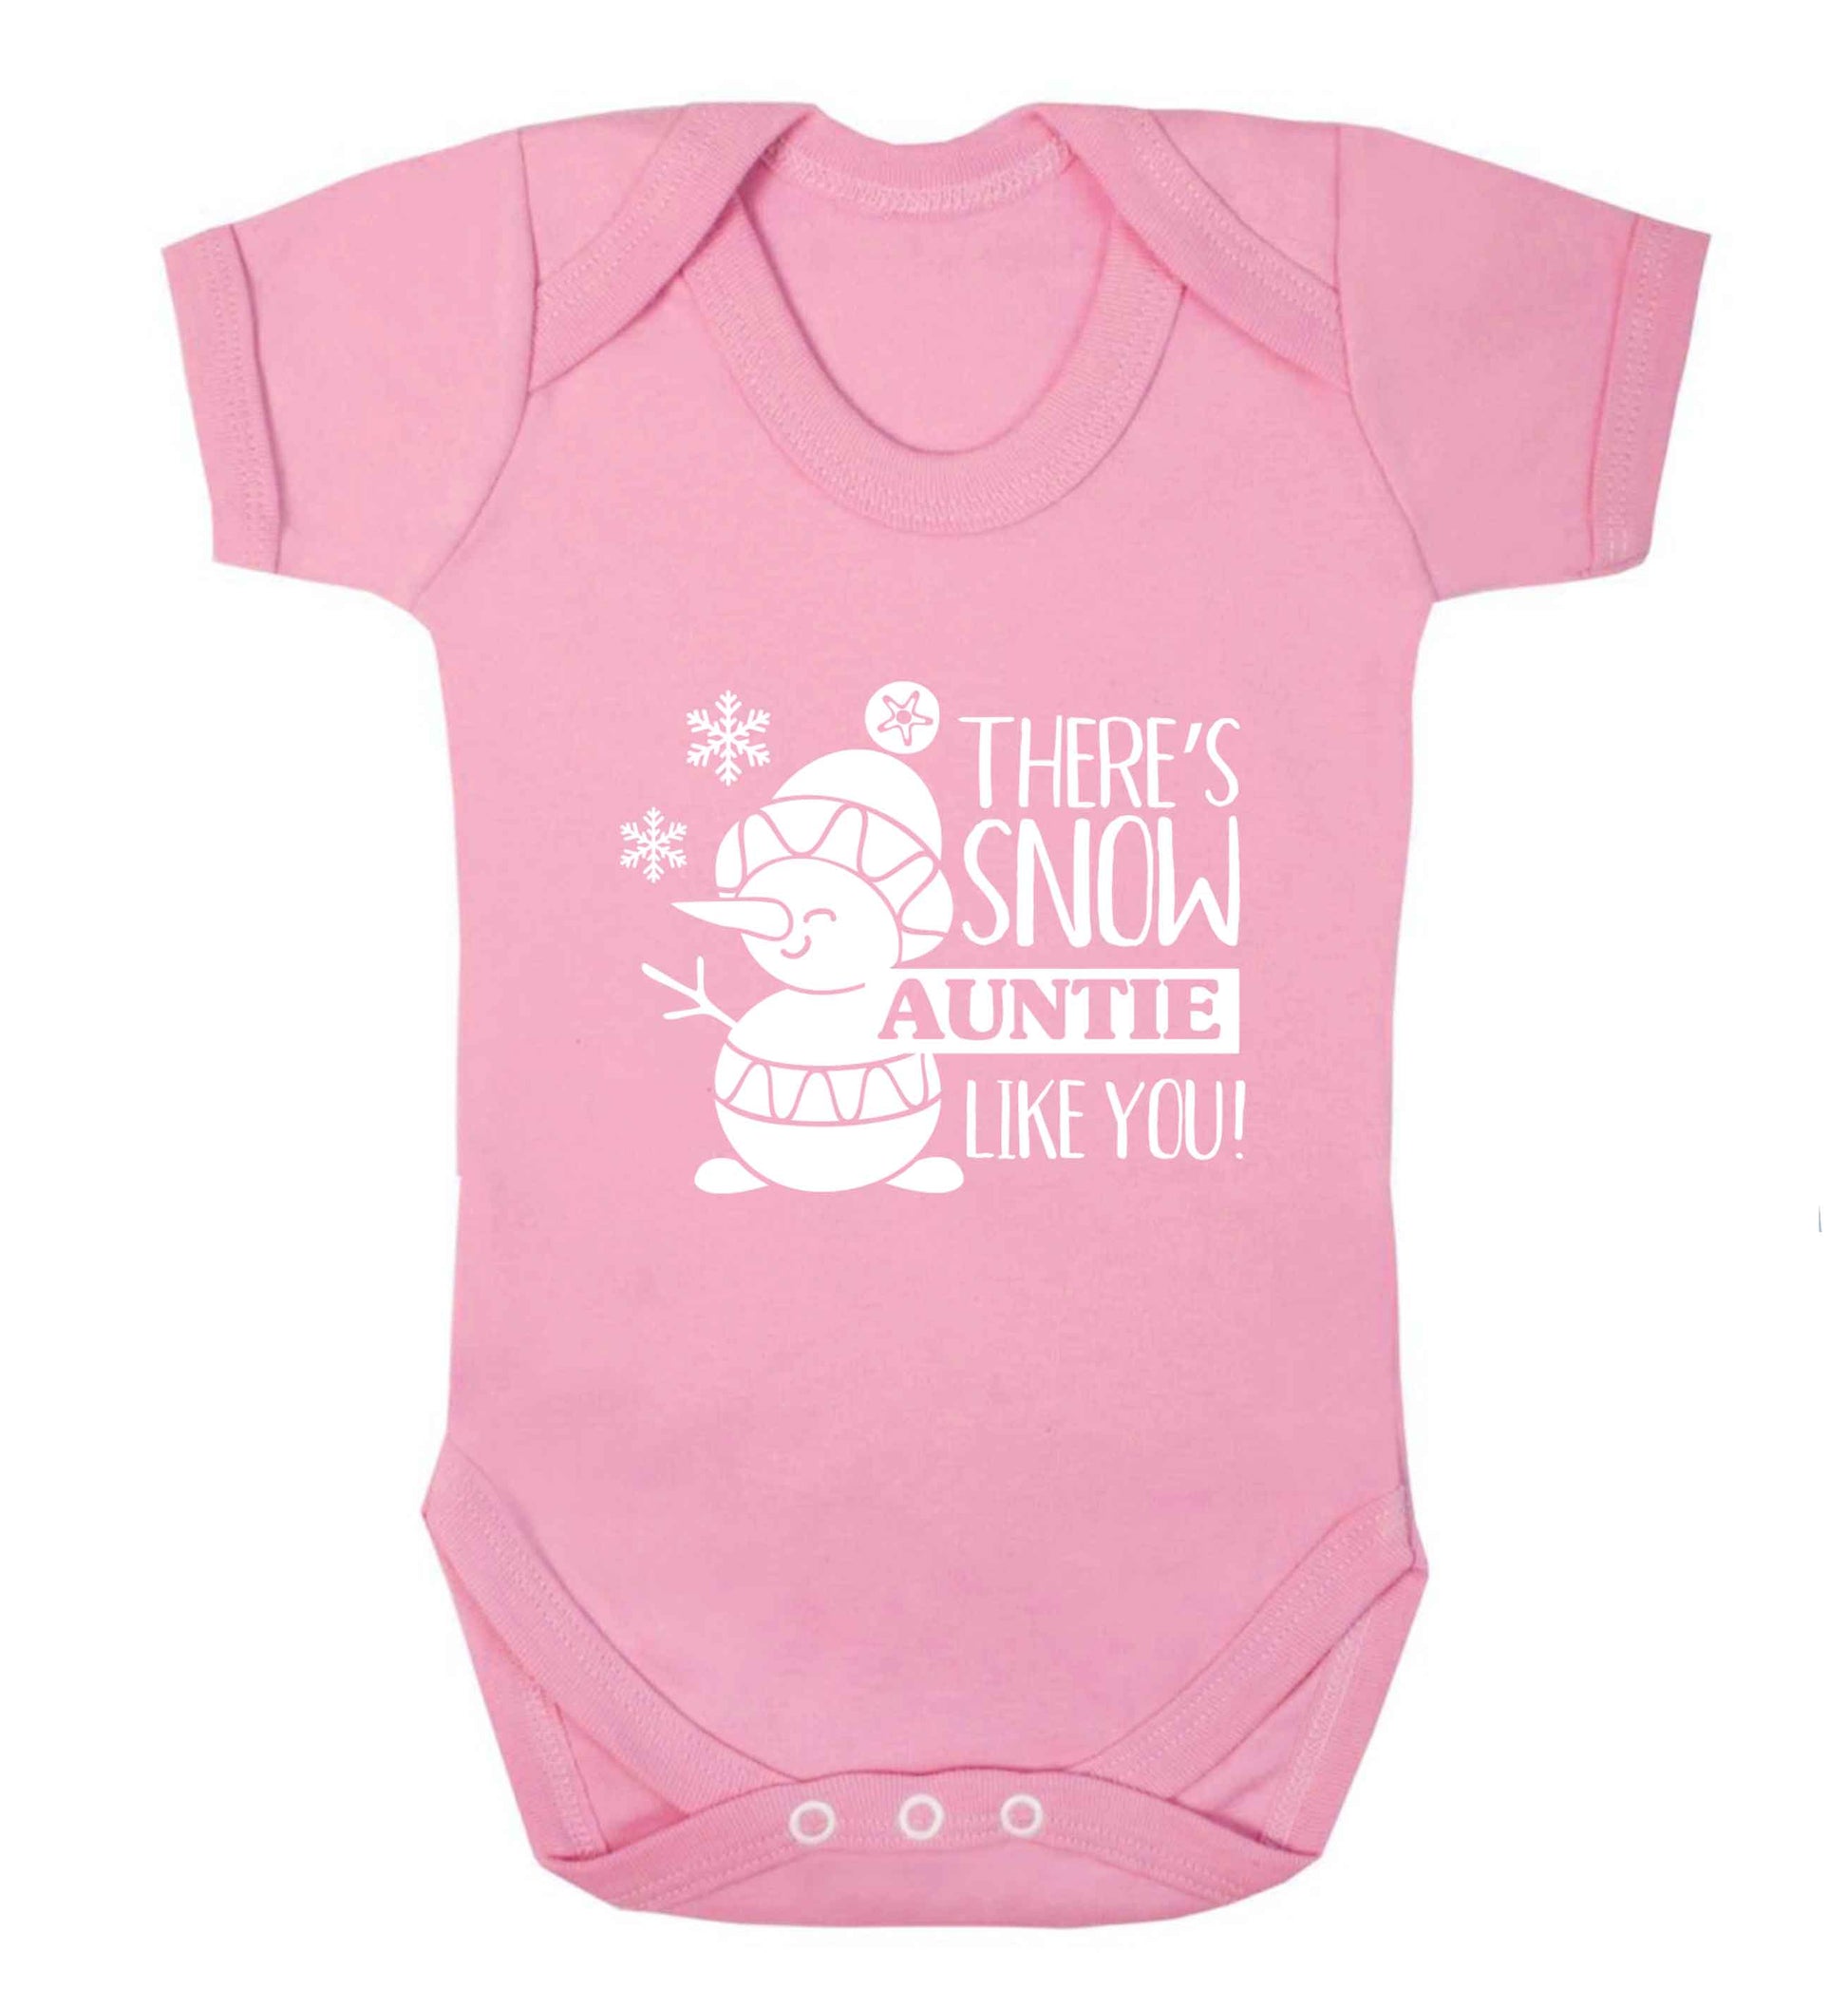 There's snow auntie like you baby vest pale pink 18-24 months